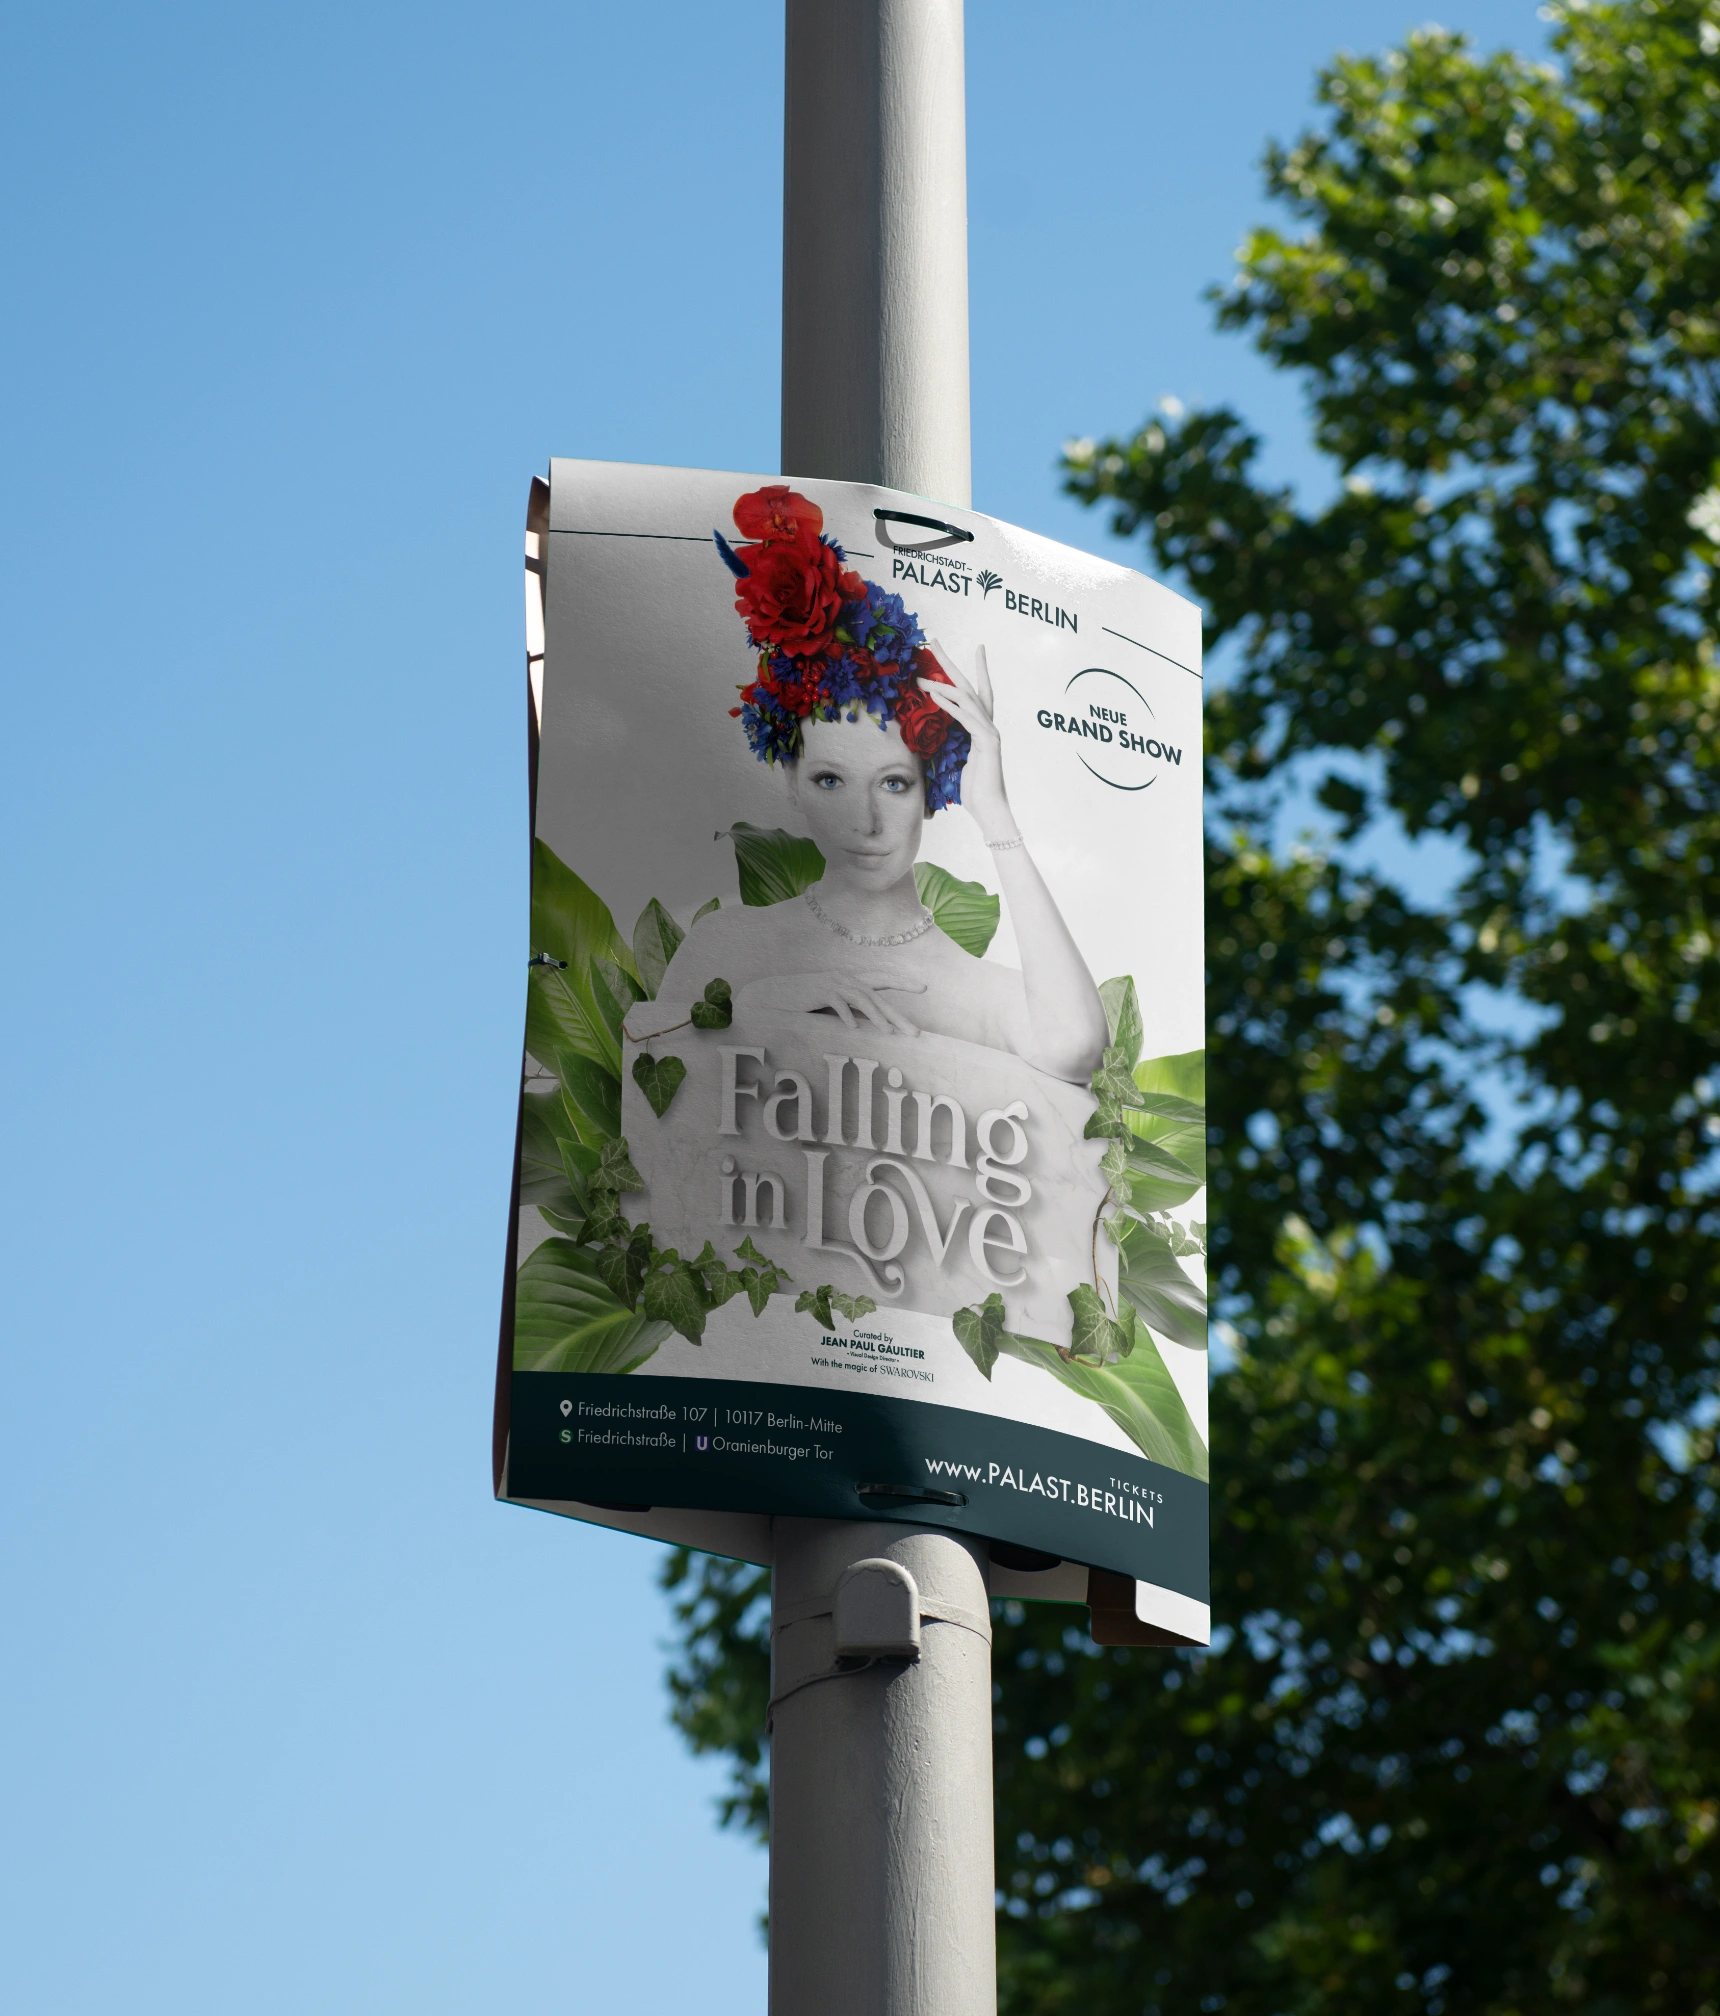 A picture shows the poster of the Grande Show "Falling in Love" of the Friedrichstadtpalast on a pole in Berlin.